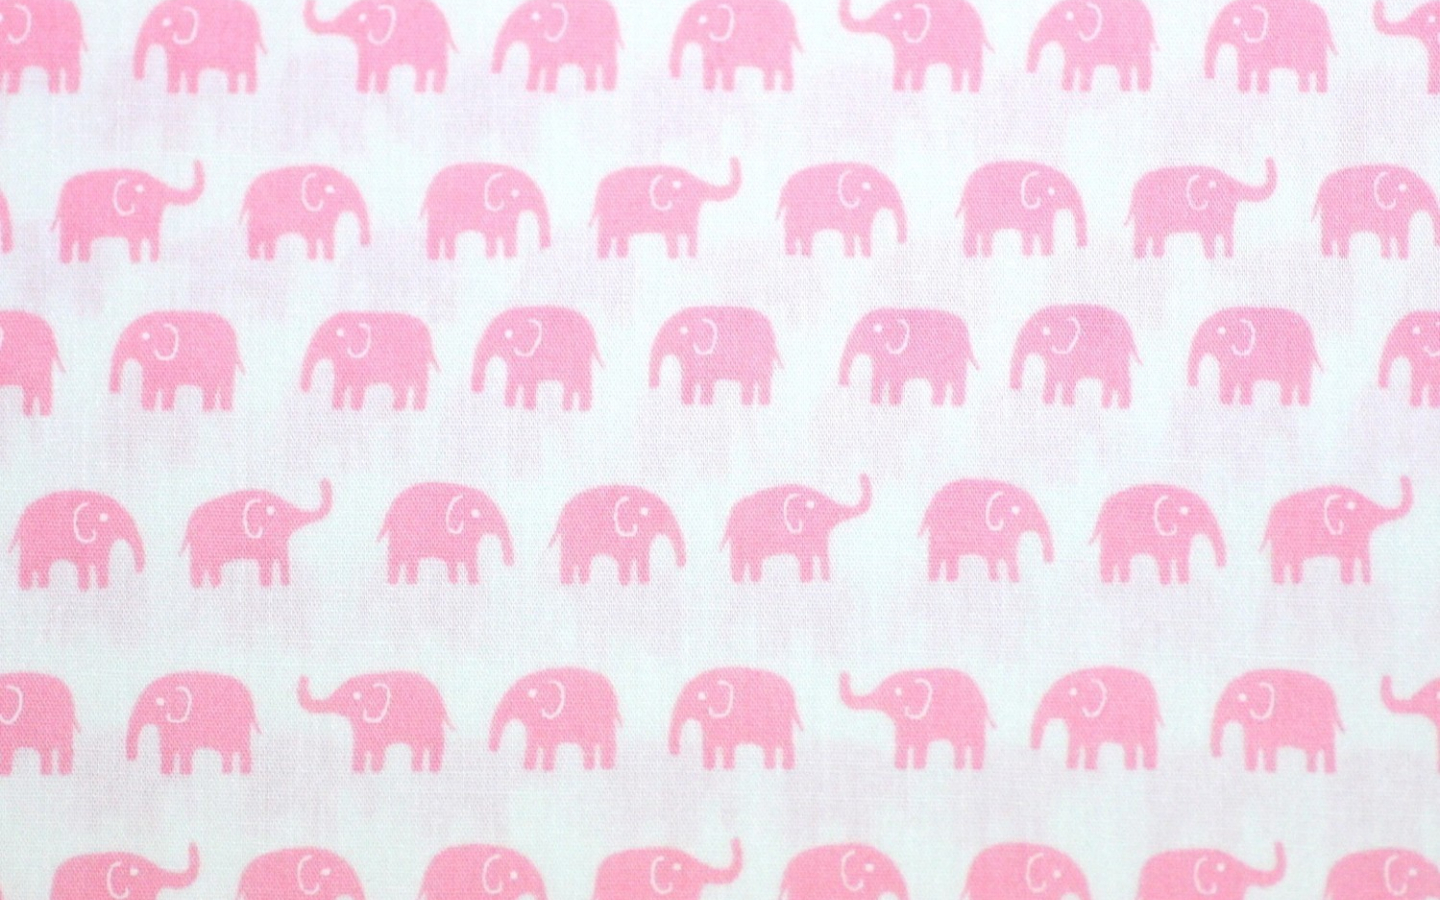 Free download Super kawaii Tiny Elephant print pink elephants by beautifulwork [1499x1072] for your Desktop, Mobile & Tablet. Explore Pink Elephant Wallpaper. African Elephant Wallpaper, Indian Elephant Wallpaper, Cute Elephant Wallpaper